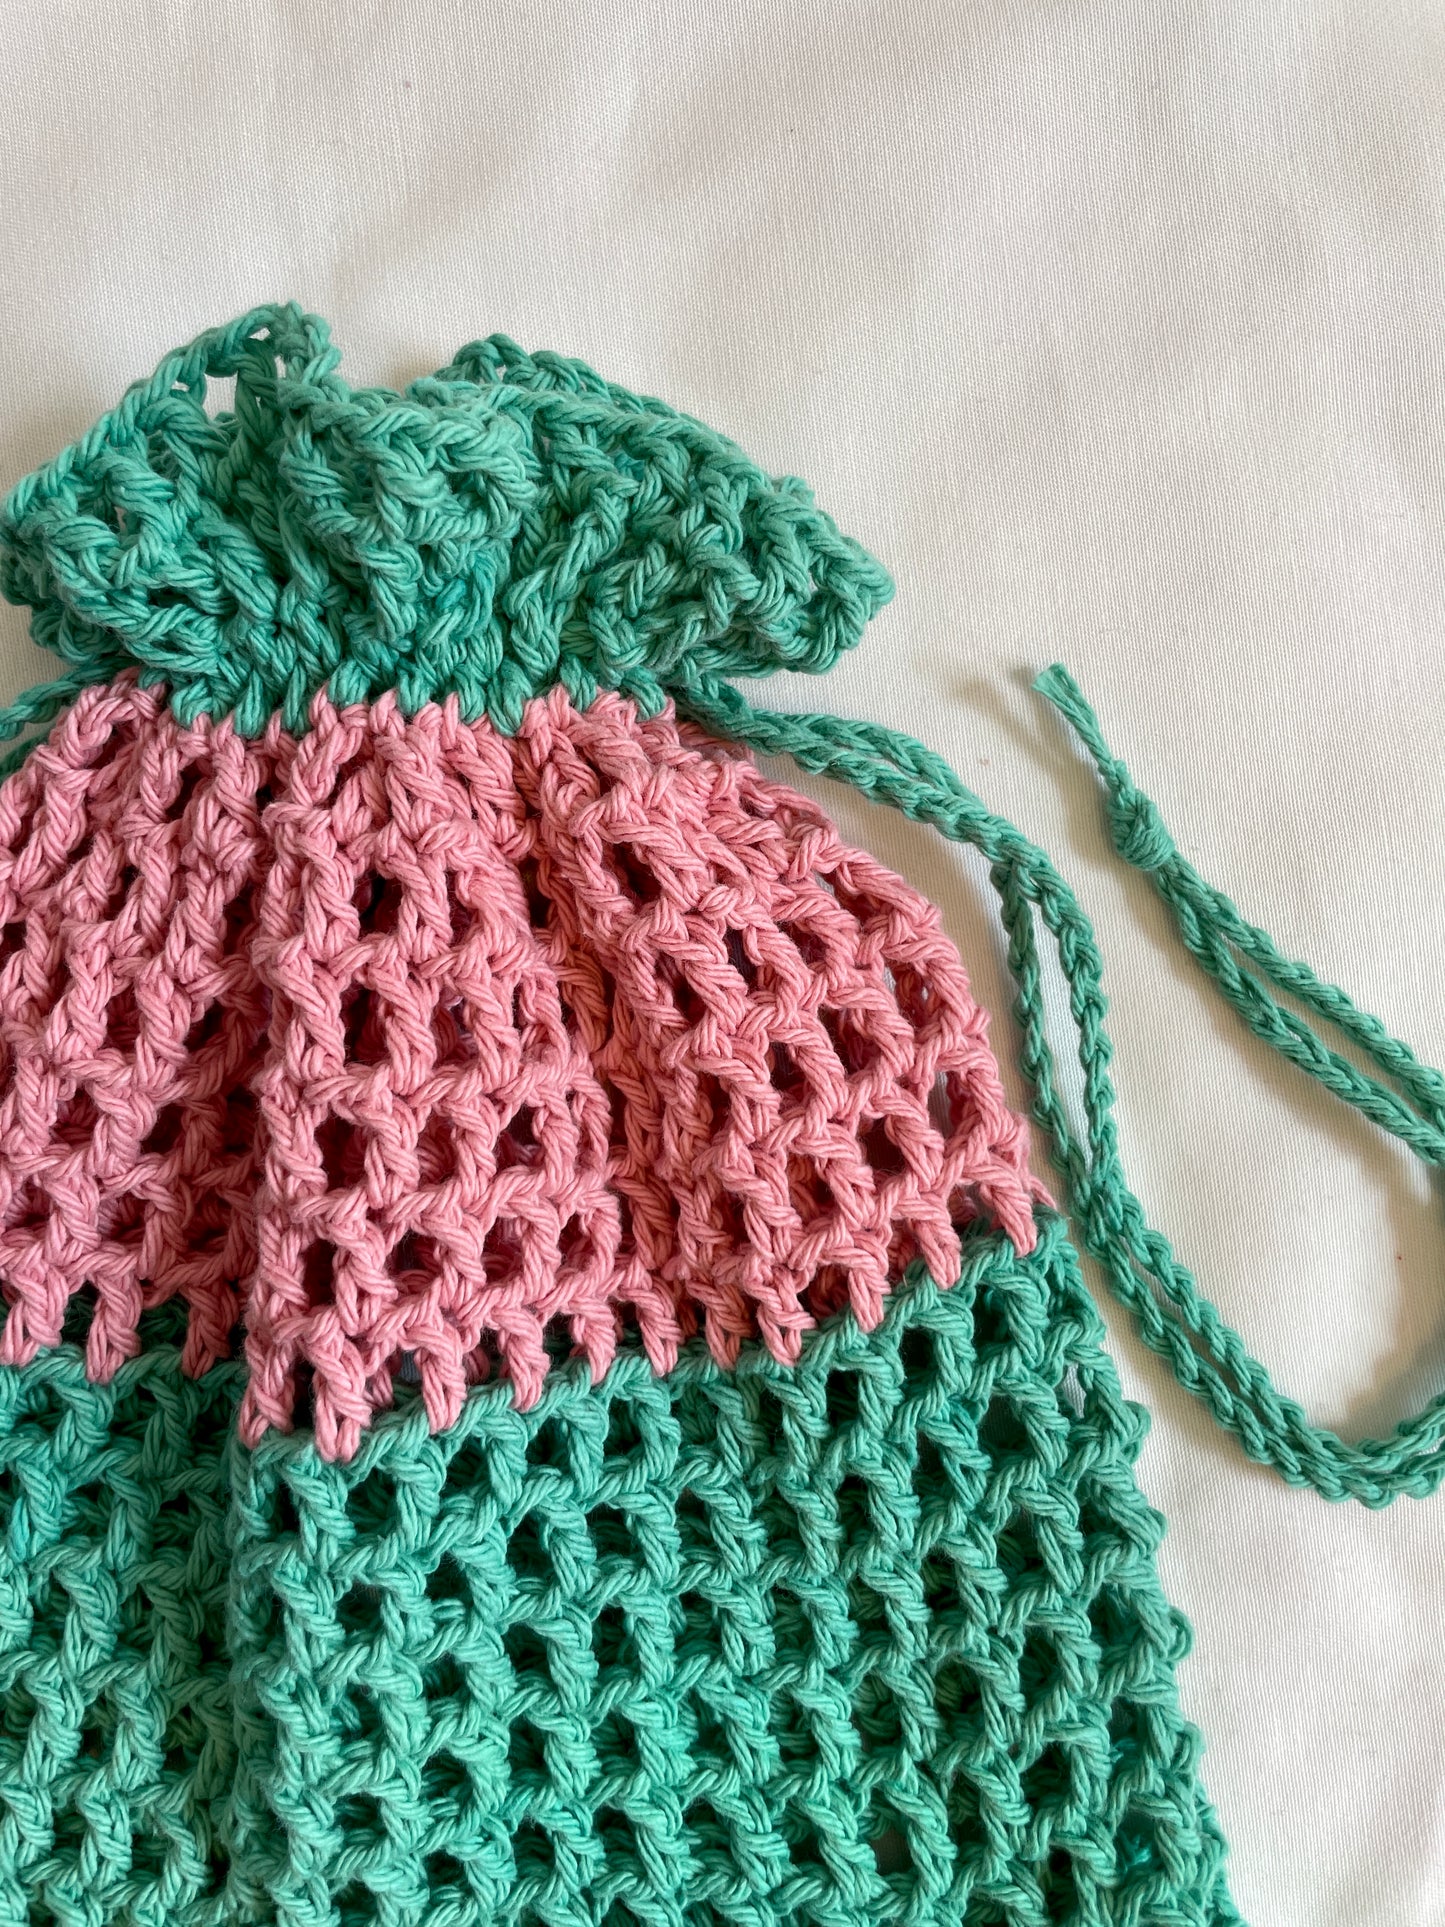 MED Mesh Pouch - Emerald/Pink